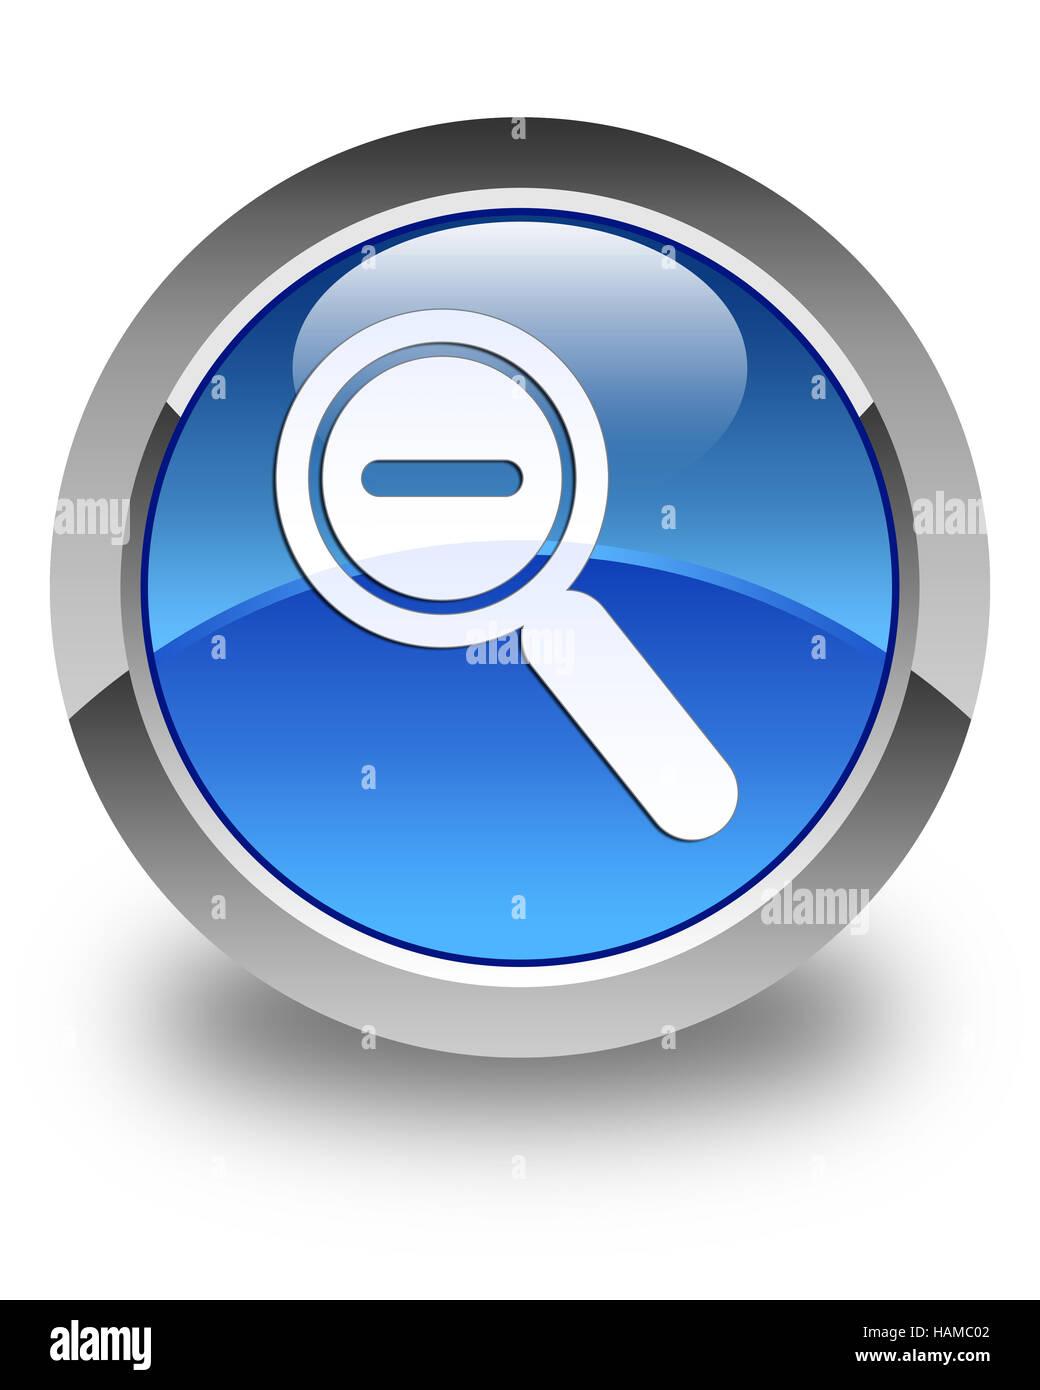 Zoom out icon isolated on glossy blue round button abstract illustration Stock Photo